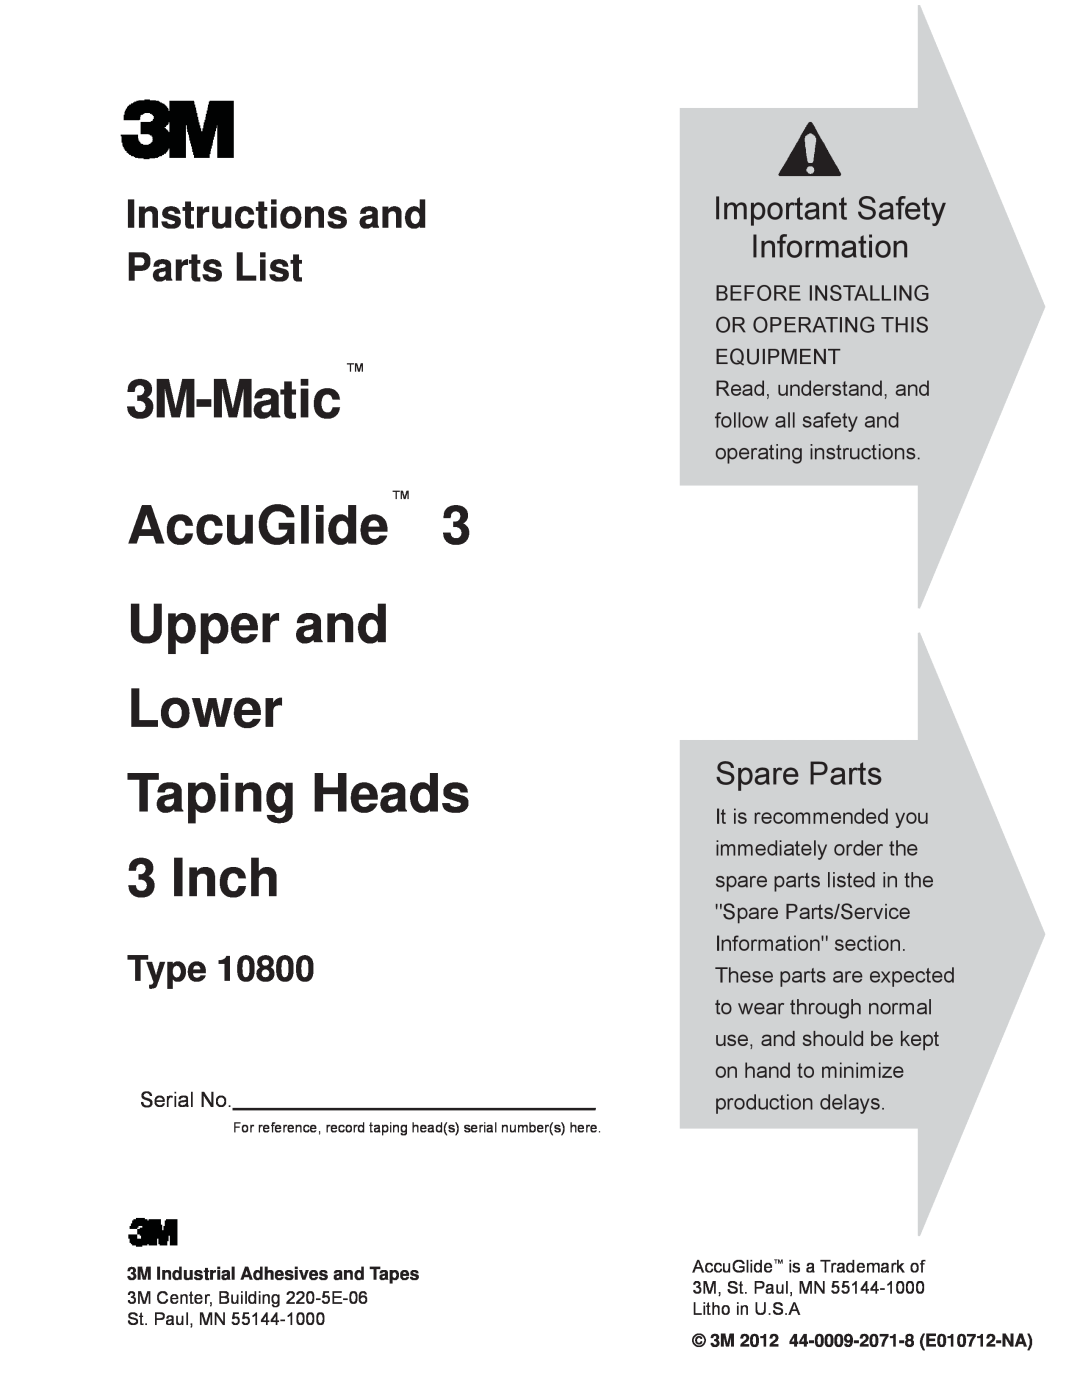 3M 800a3 manual 3M-Matic AccuGlide Upper and Lower Taping Heads, Inch, Instructions and Parts List, Type, Spare Parts 